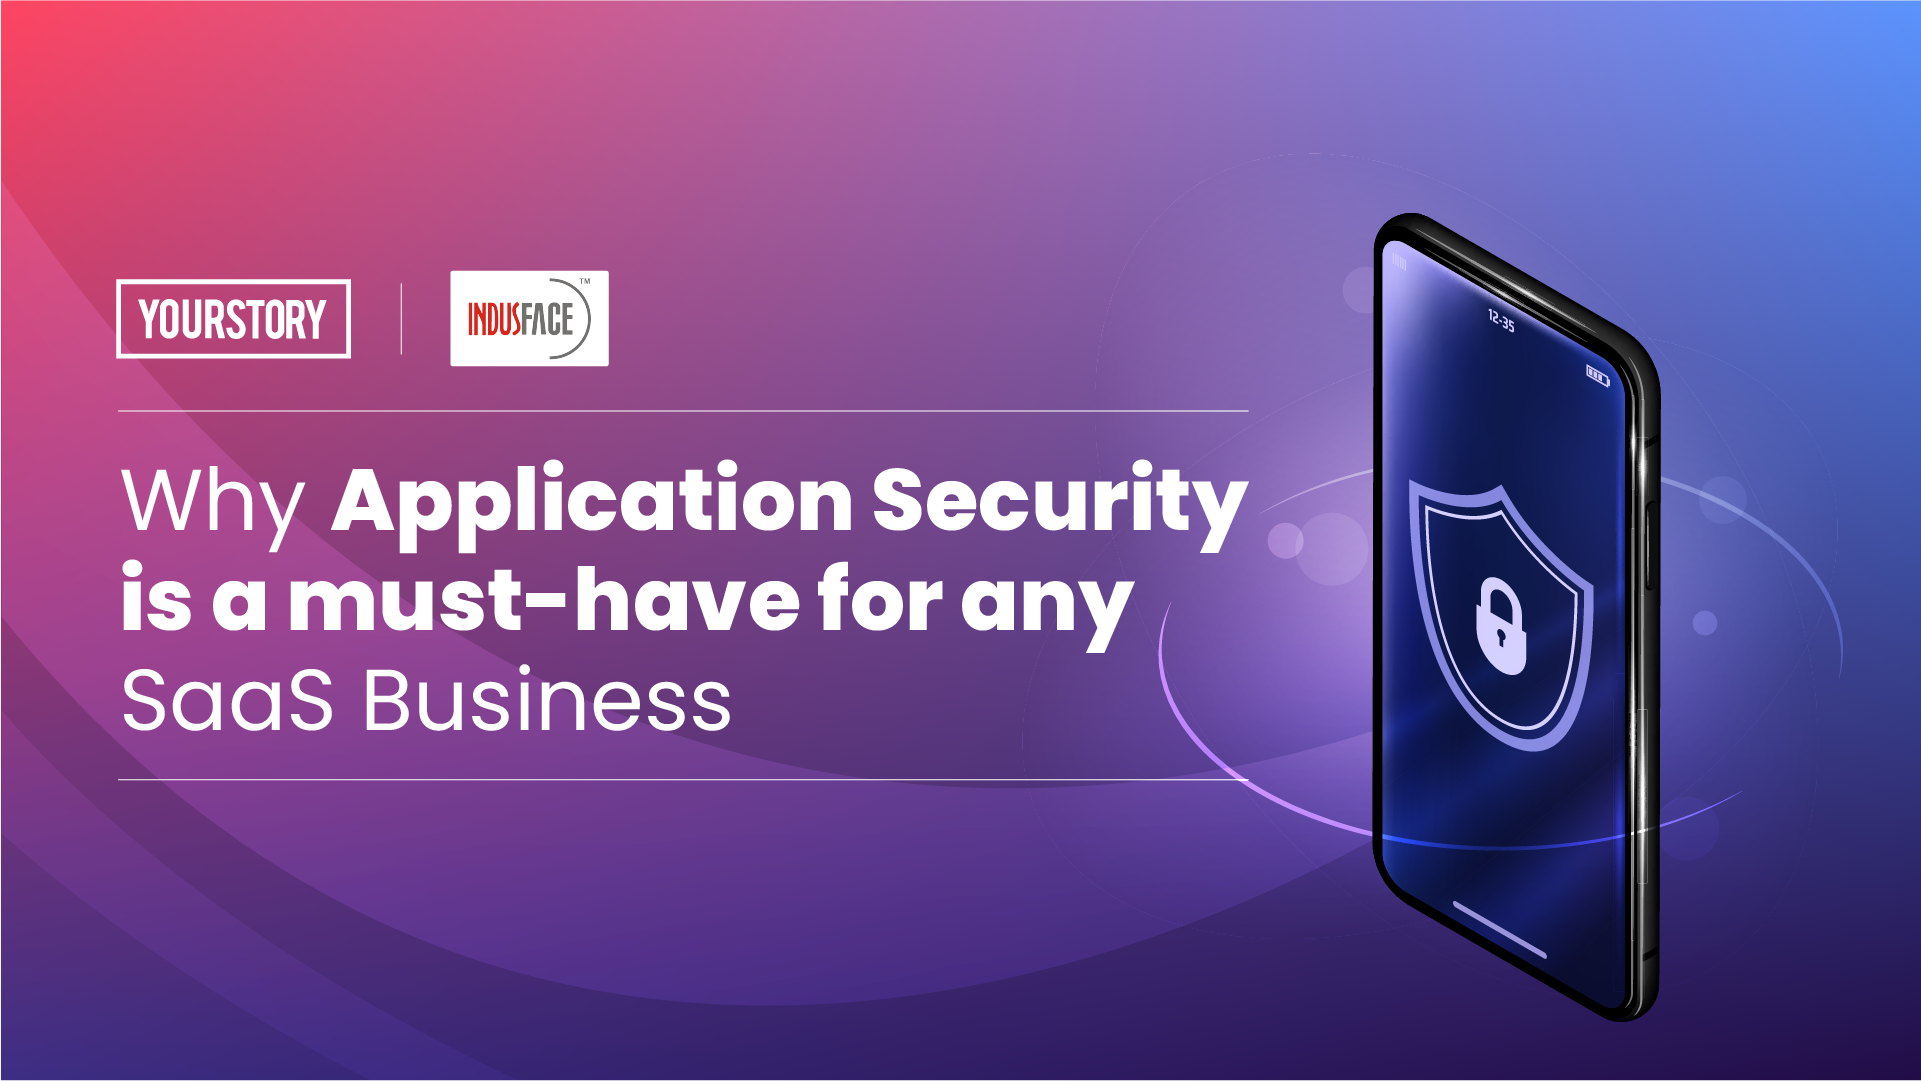 Why SaaS startups must think about application security, as much as they do about scale and agility on Day 1

